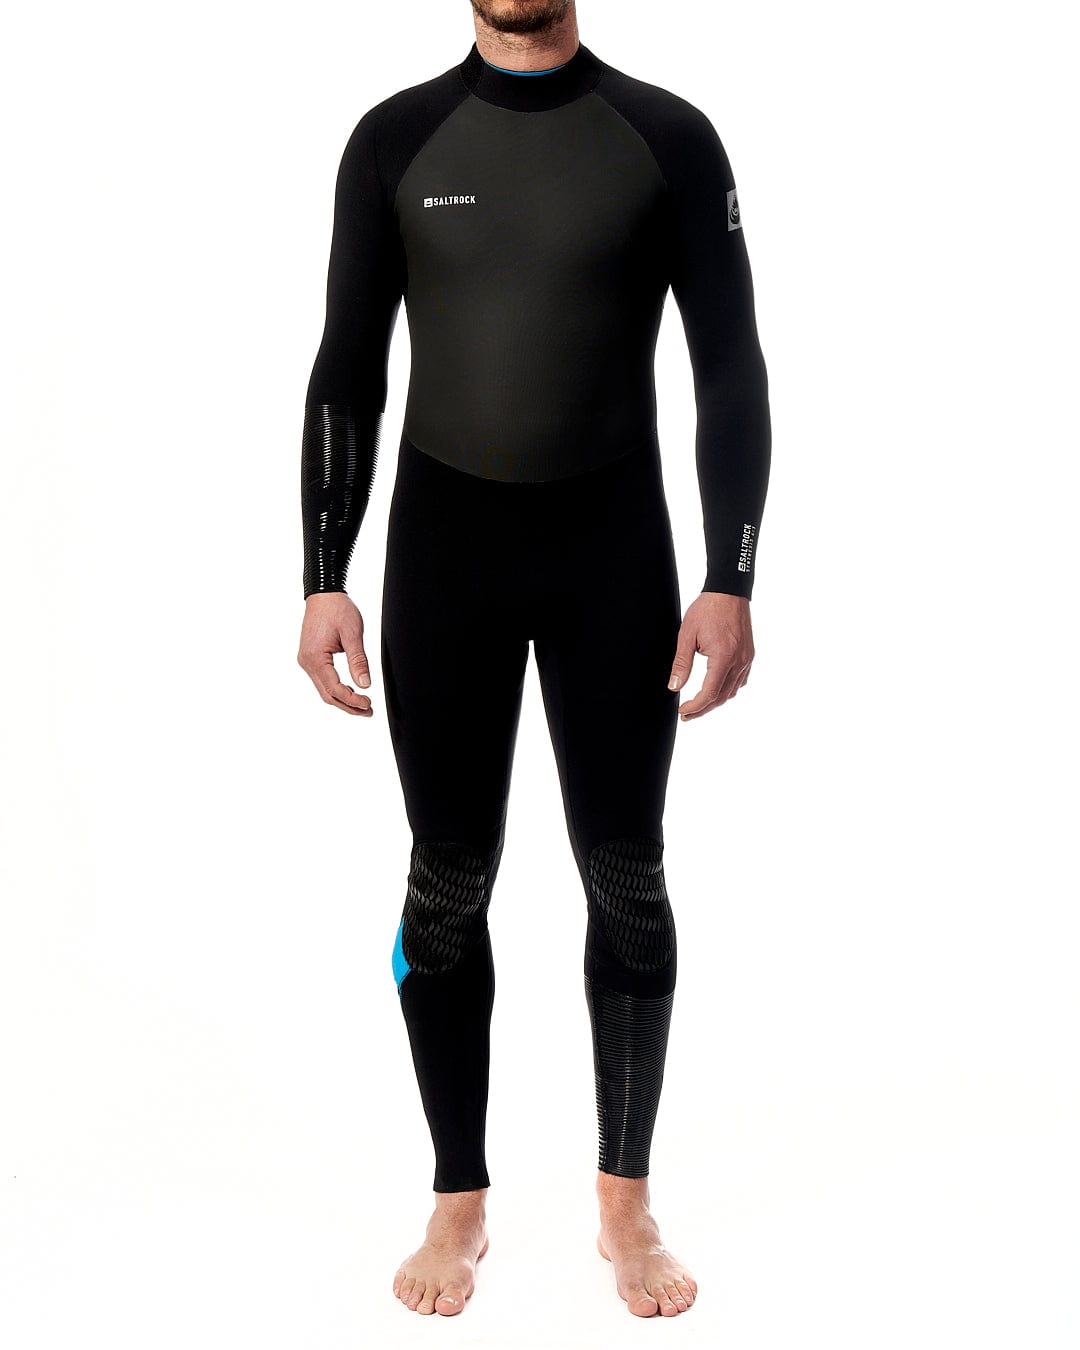 A man in a Saltrock Synthesis - Mens 4/3 Back Zip Full Wetsuit - Black standing on a white background.